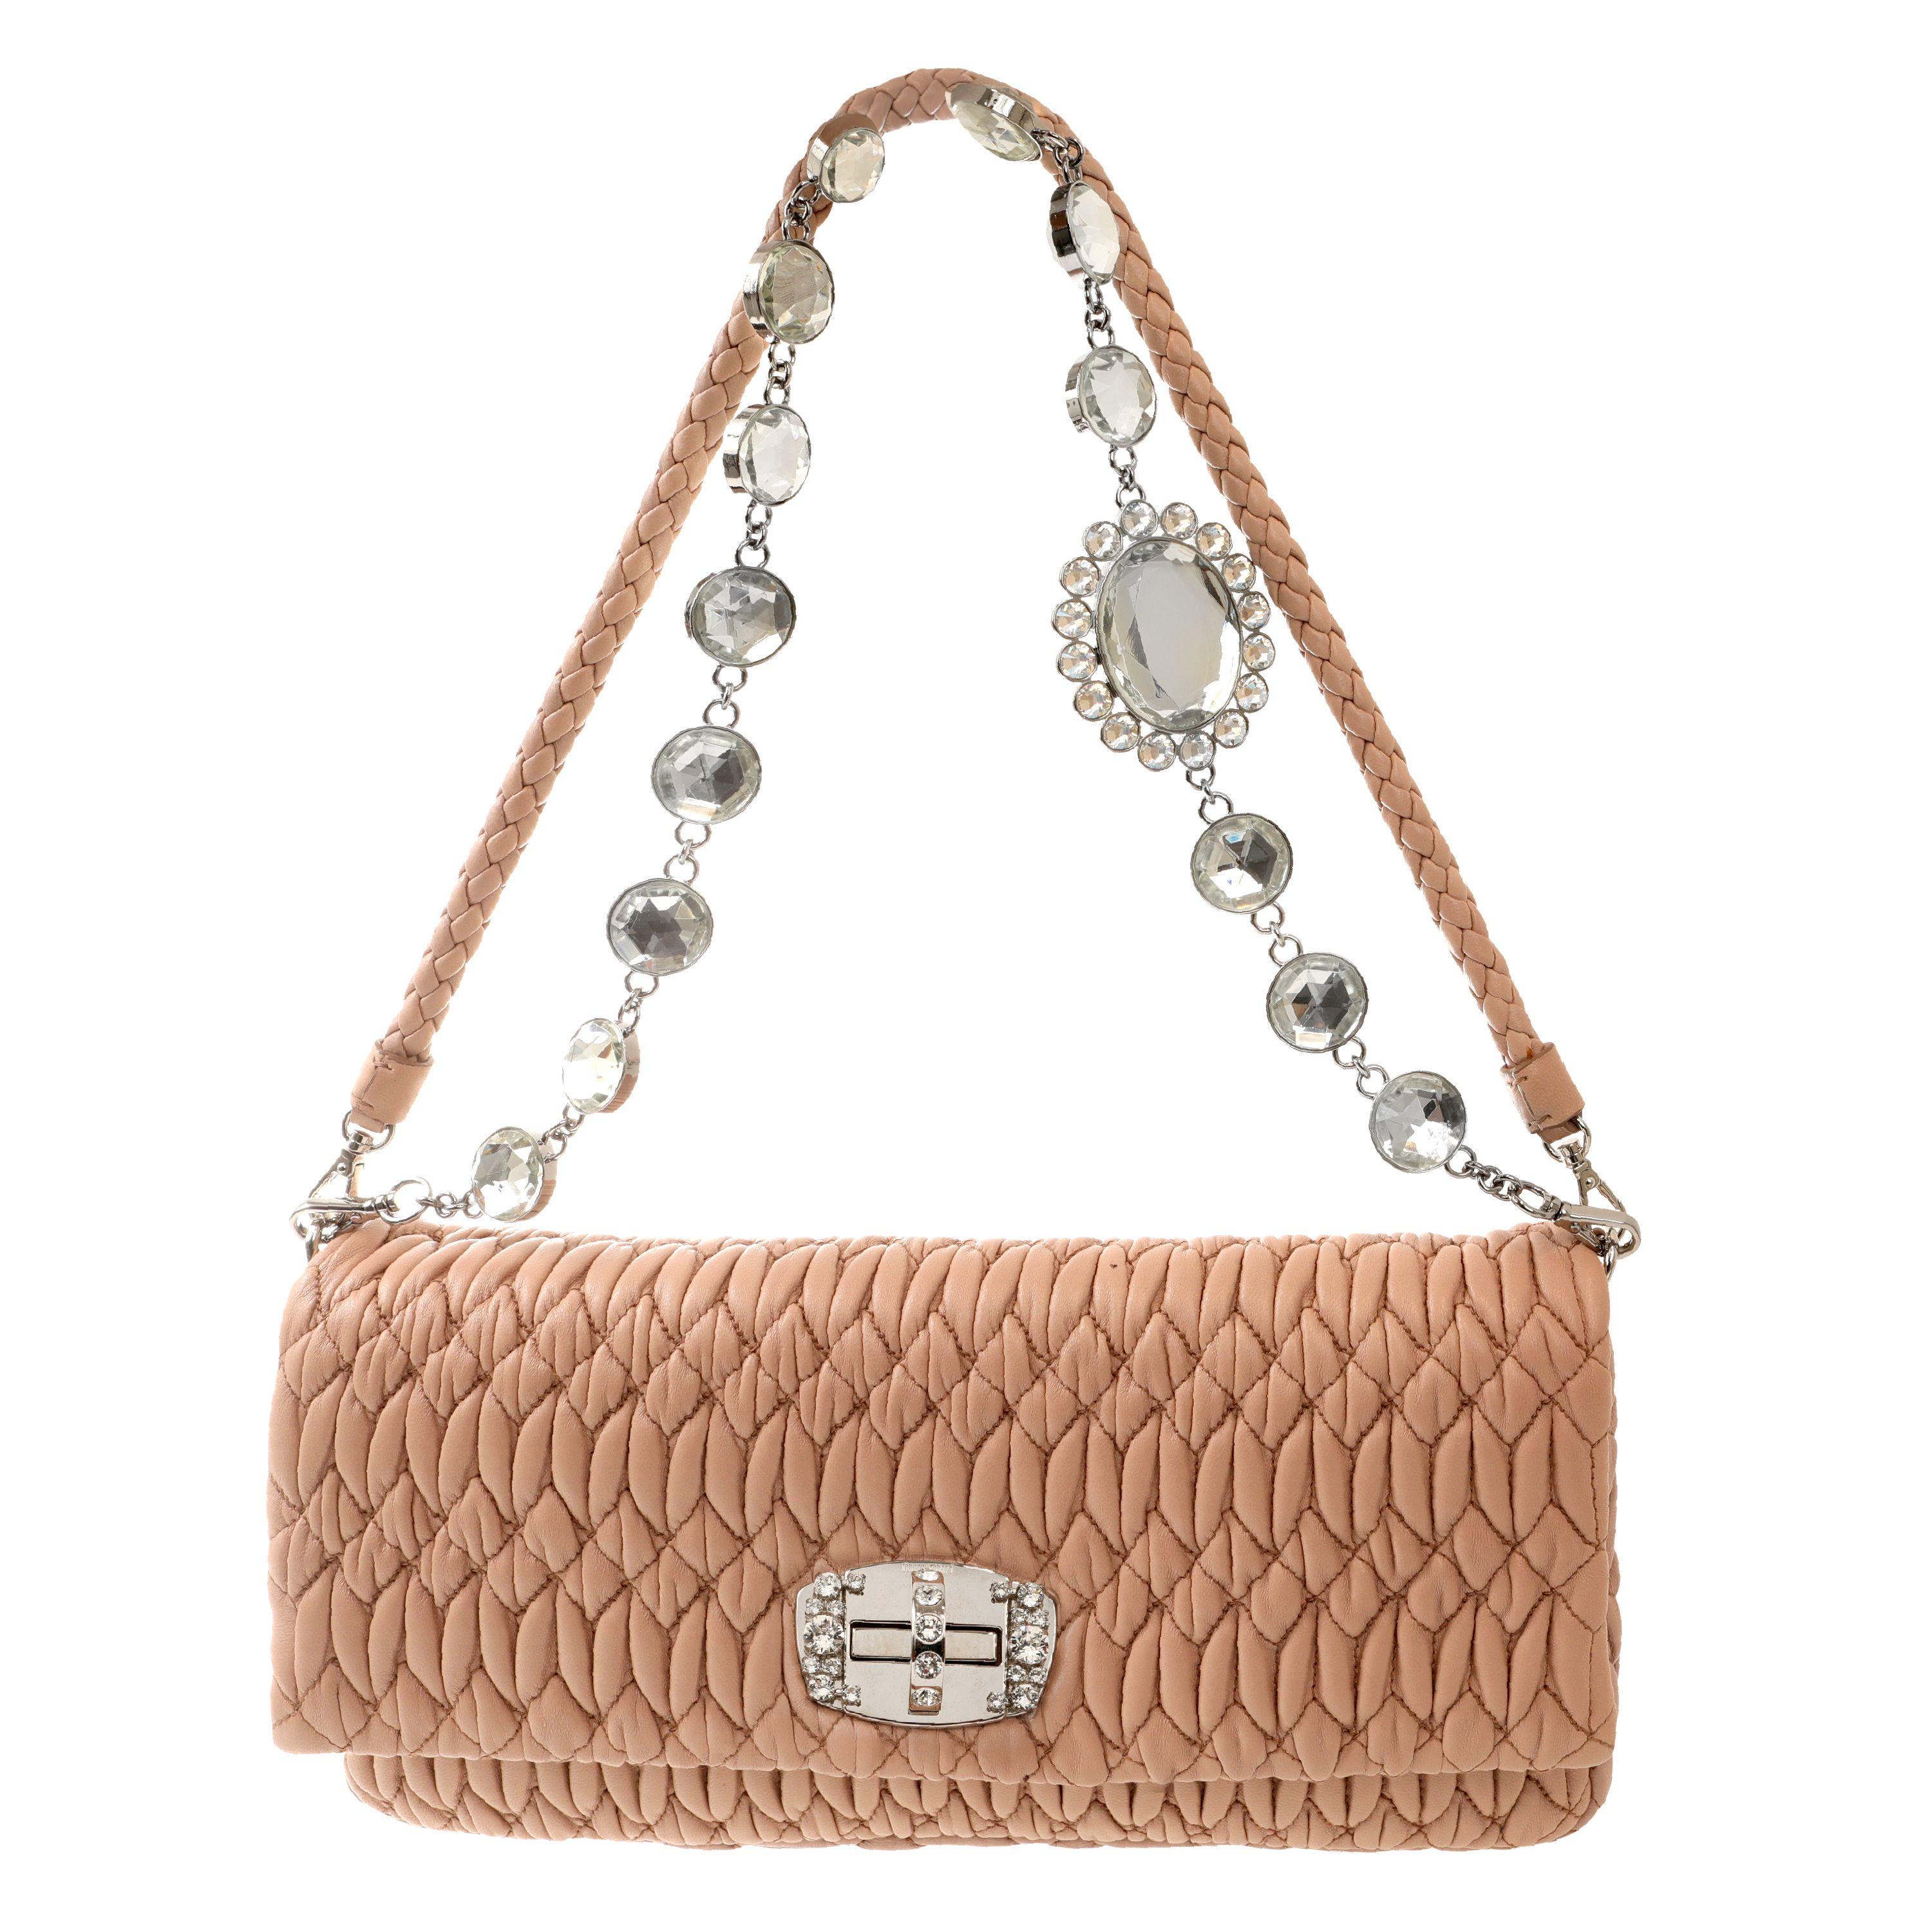 Miu Miu Nude Iconic Crystal Cloquè Small Bag with Silver Hardware In Excellent Condition For Sale In Palm Beach, FL